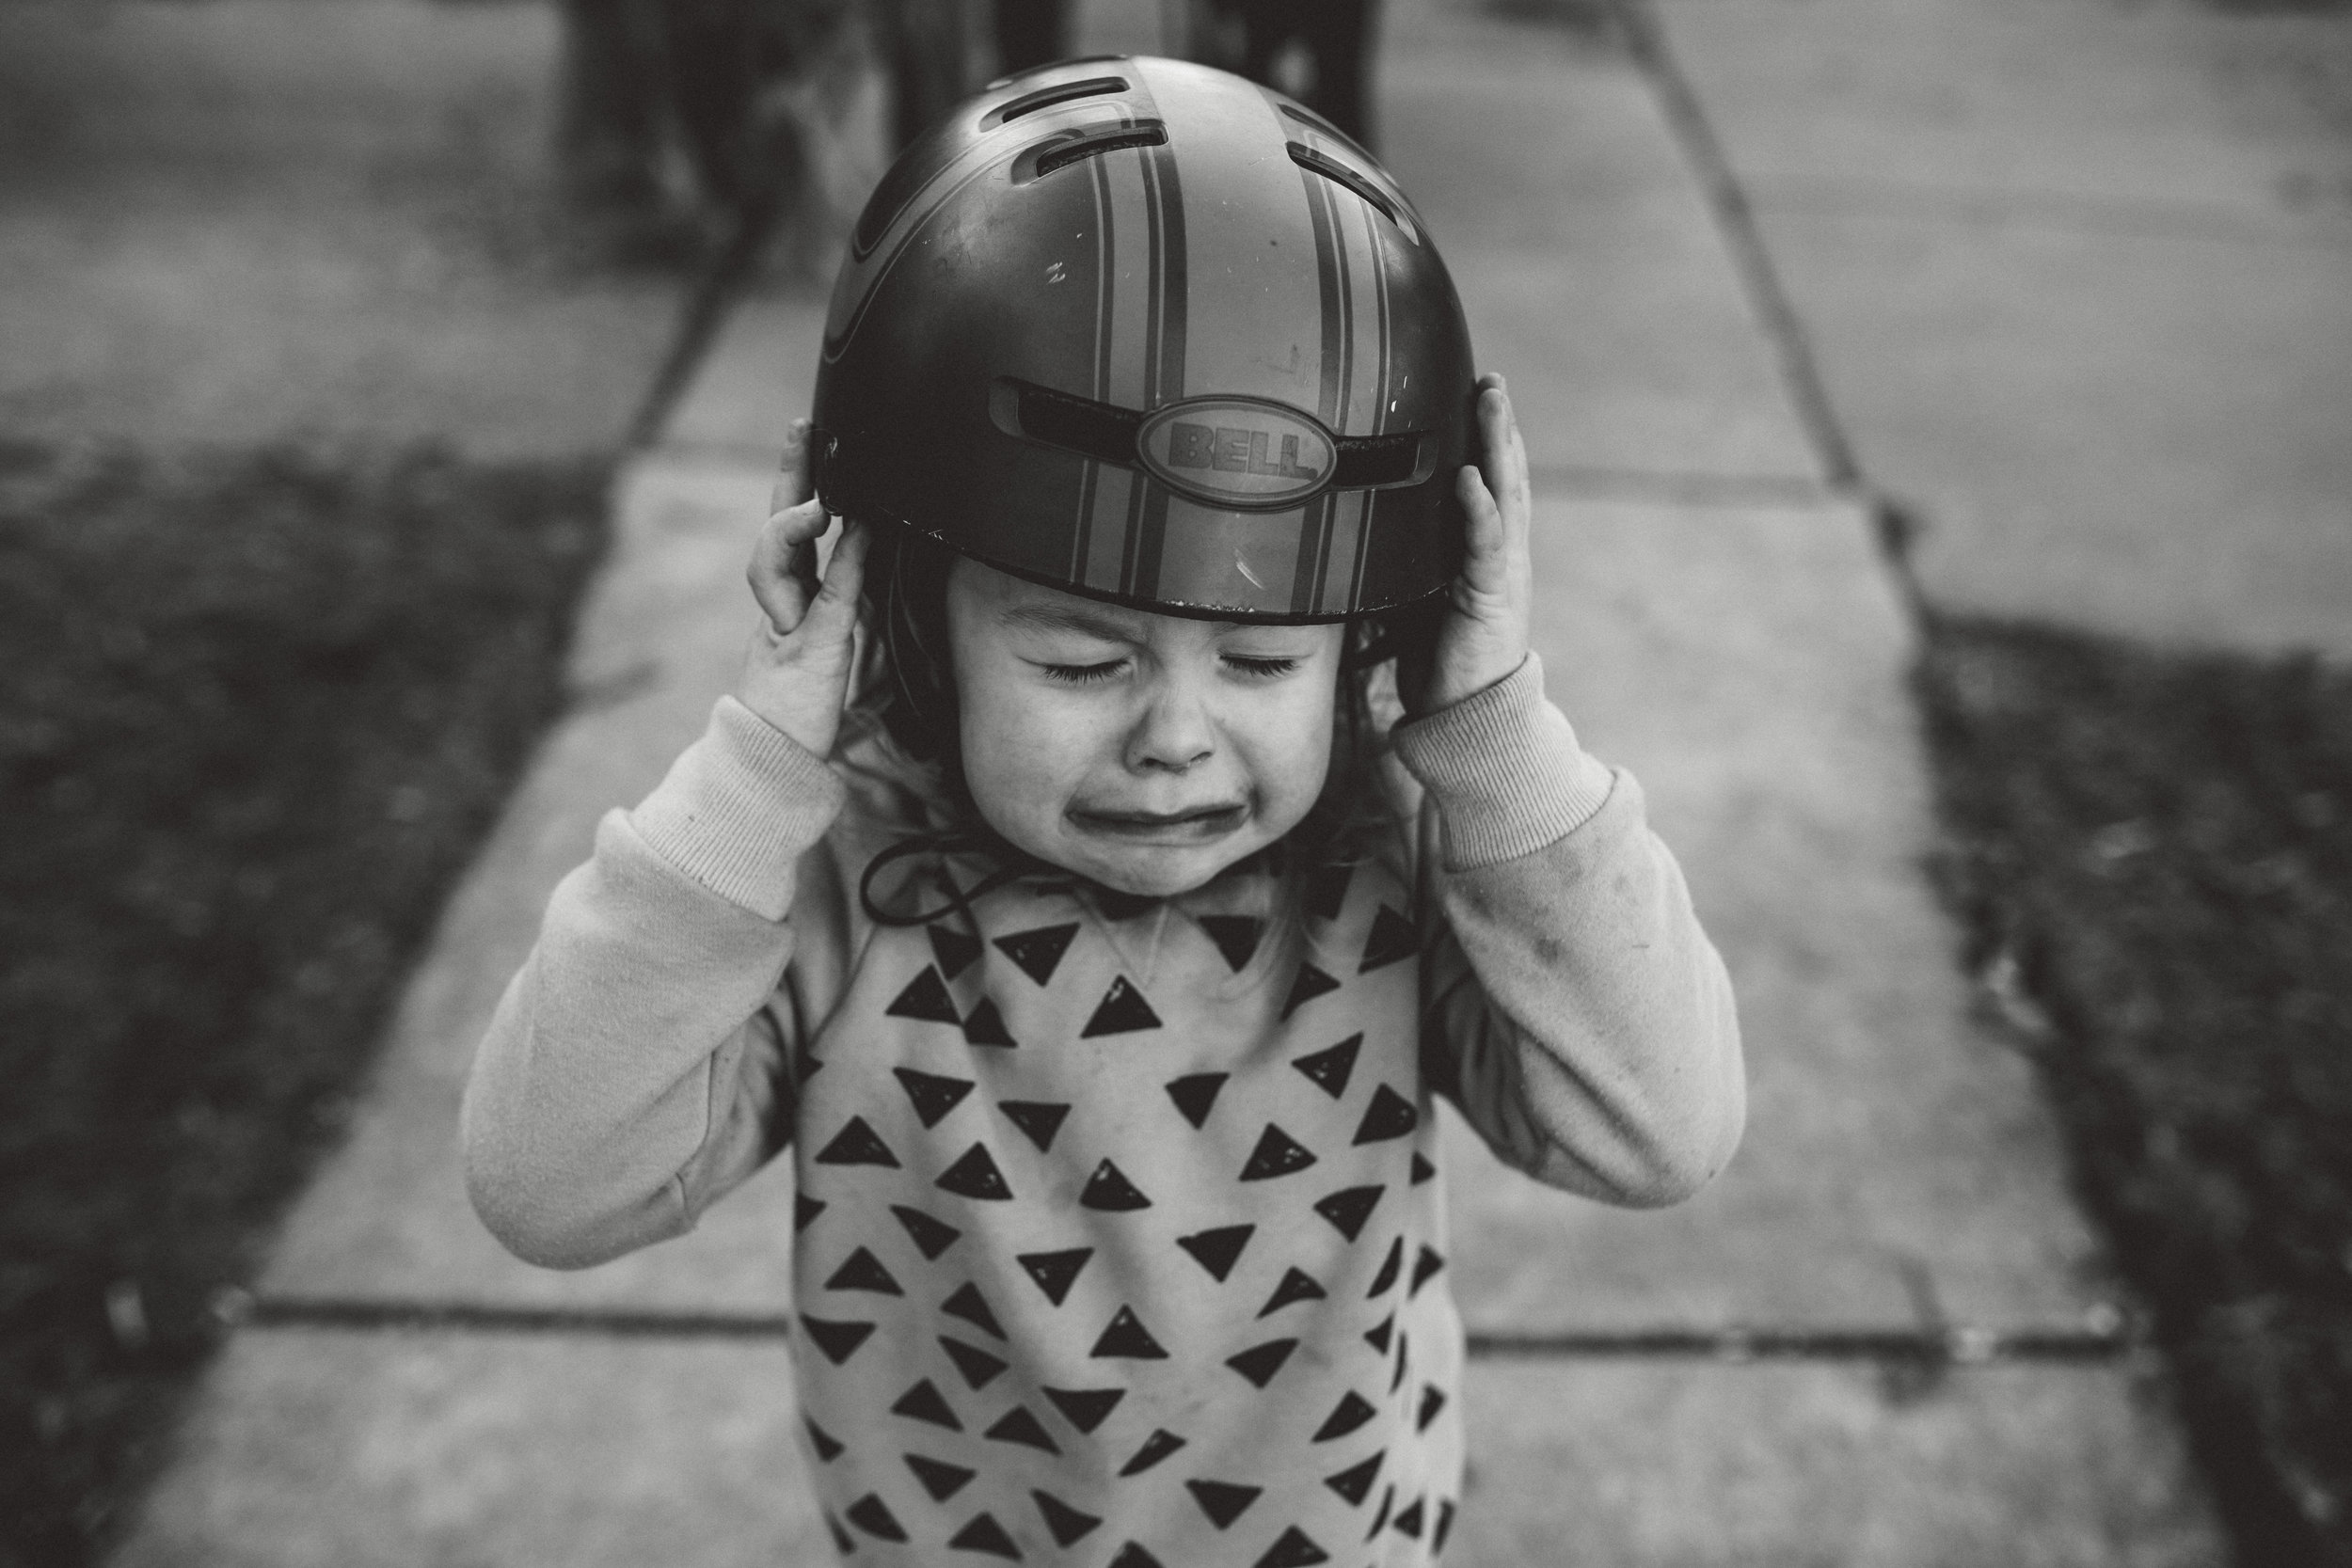 Little boy crying about helmet.